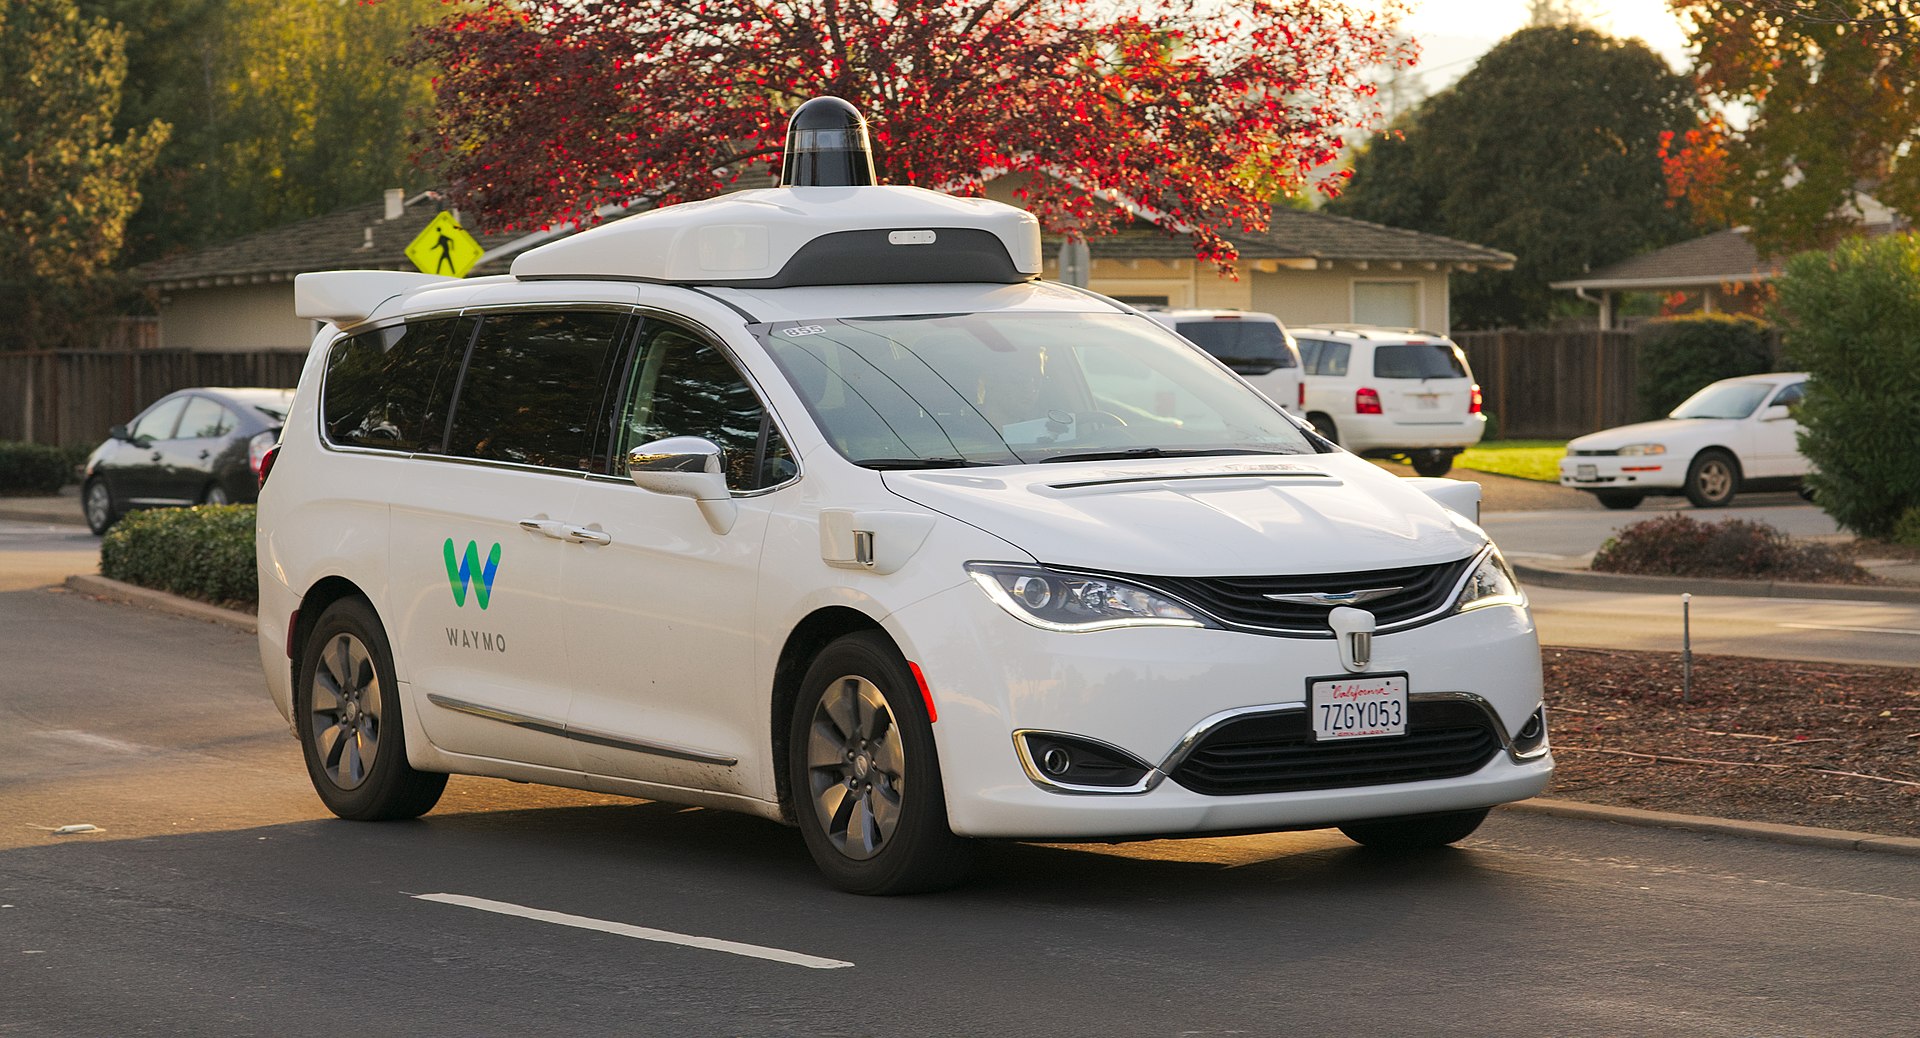 FOCUS-Waymo tests Wi-Fi in driverless taxis hoping perks can route it past rivals